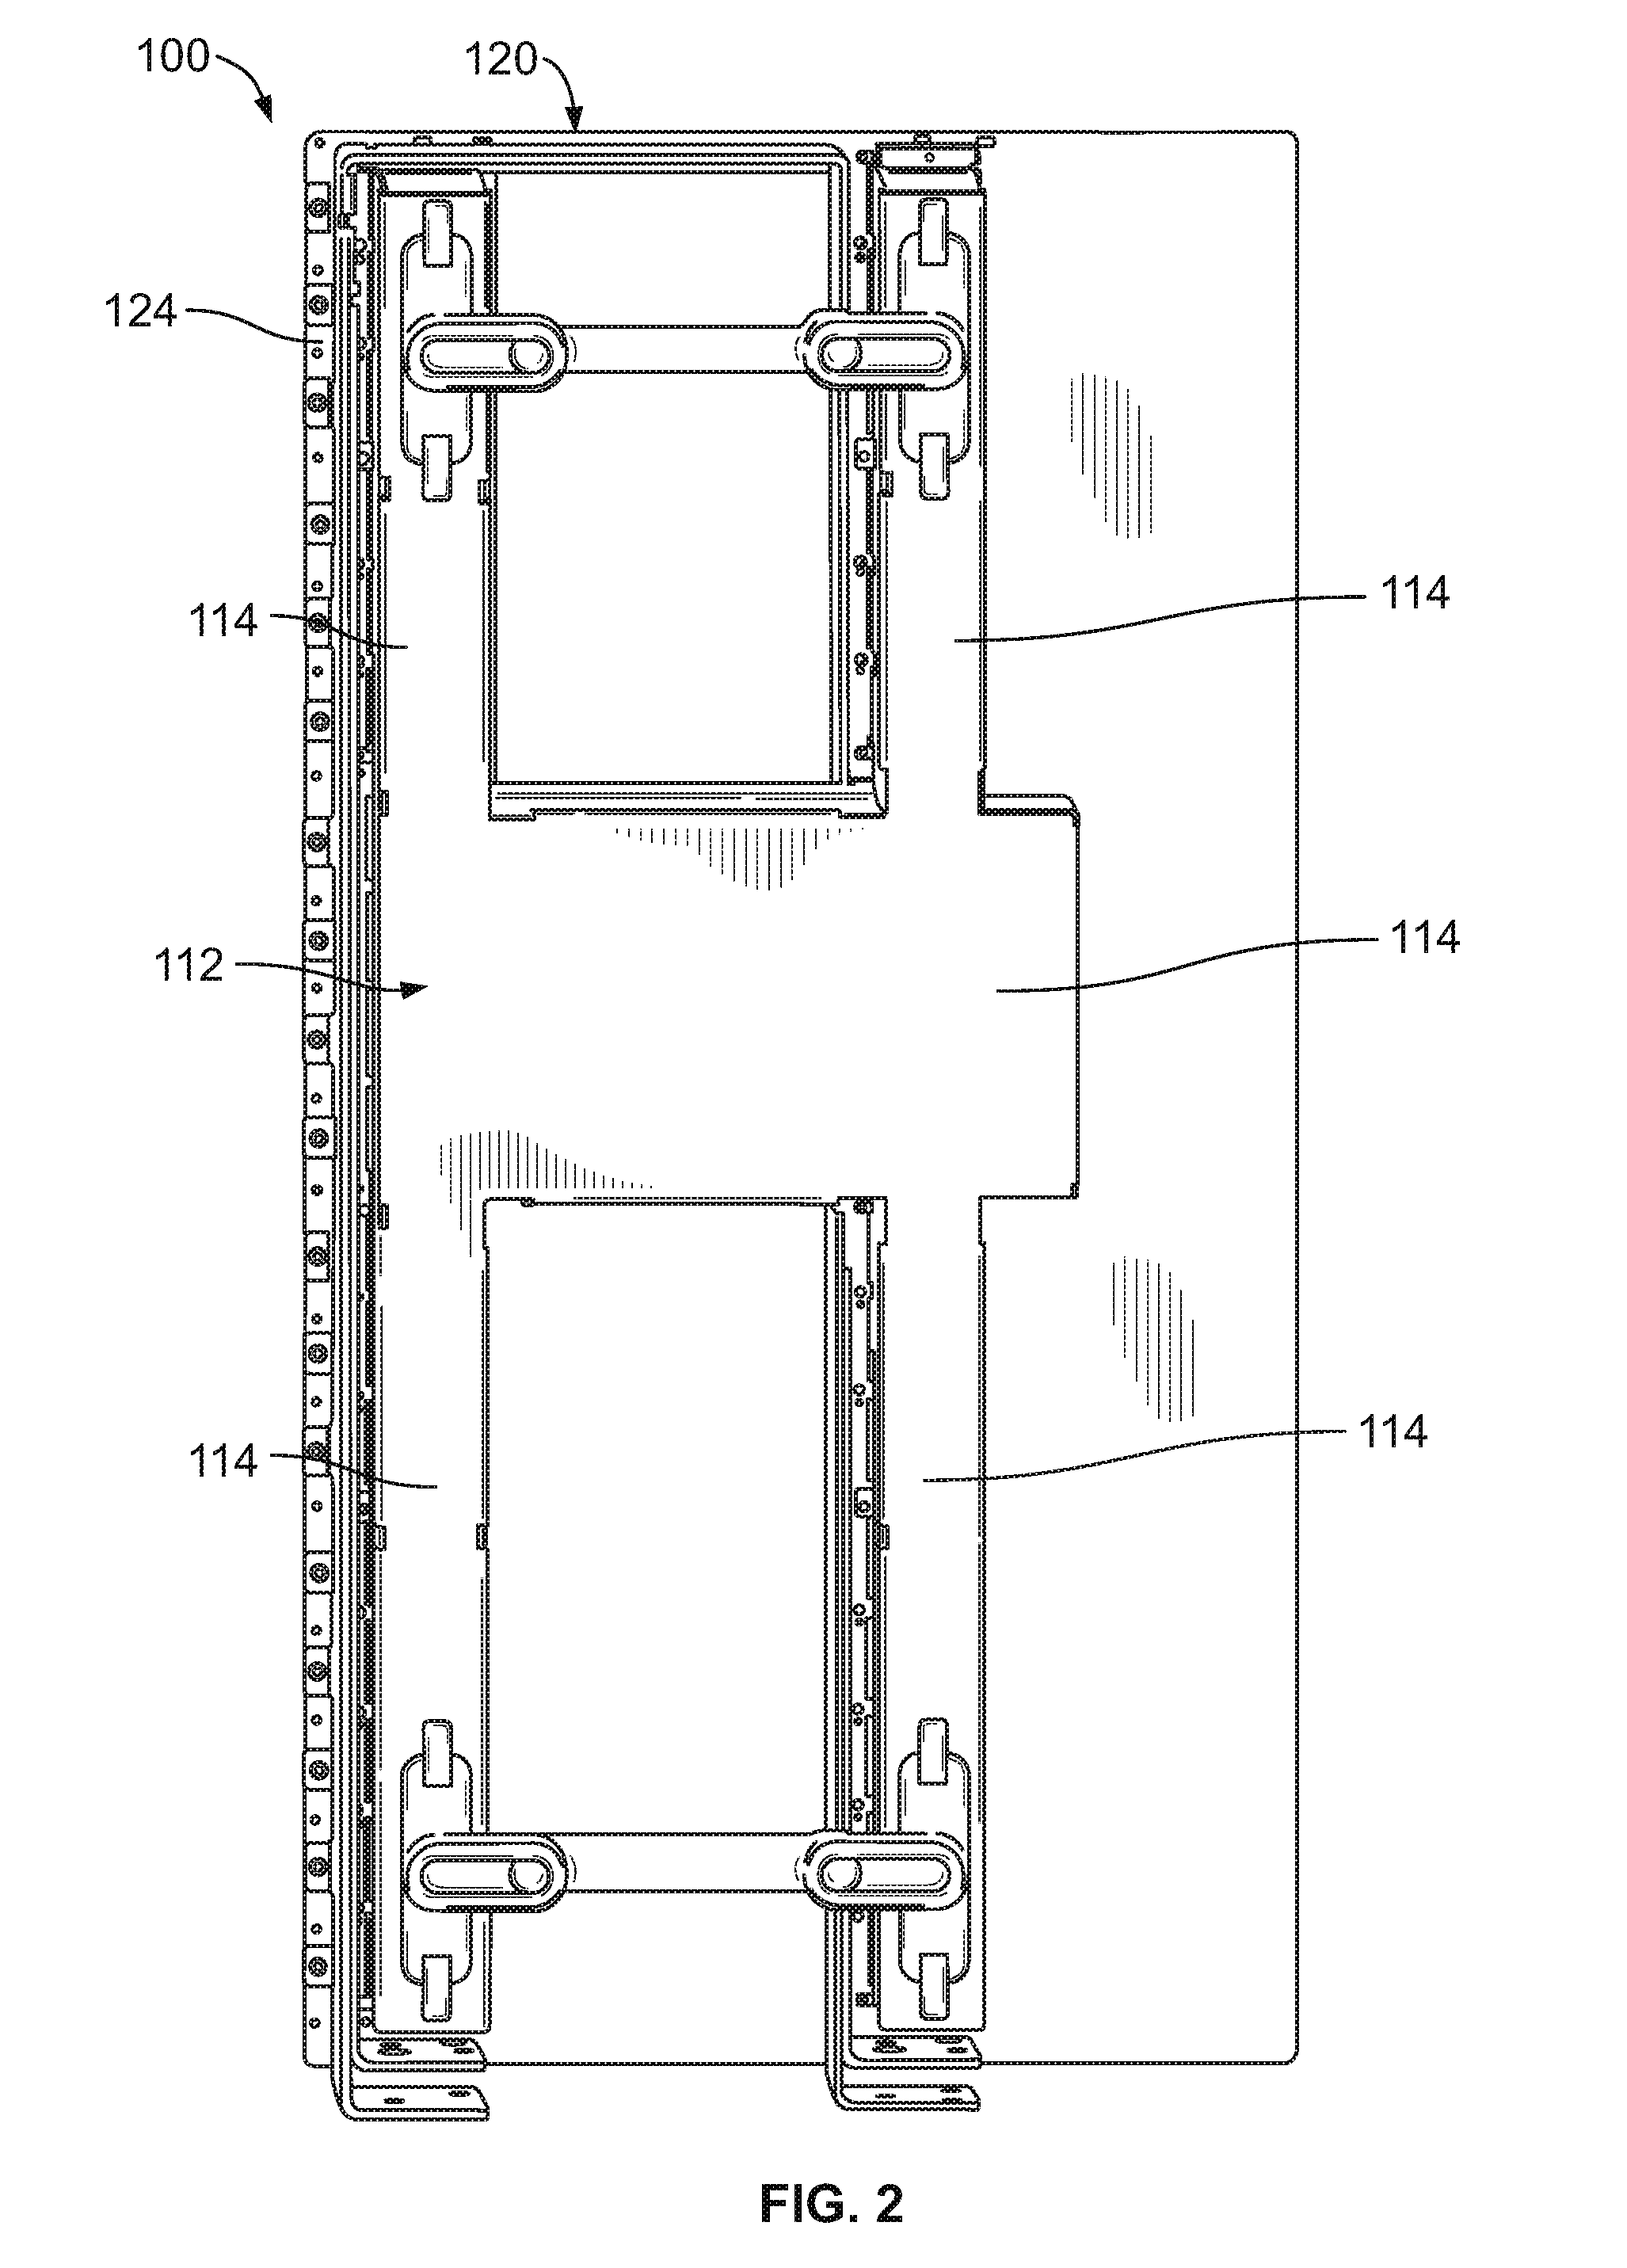 Cable backplane system having mounting blocks